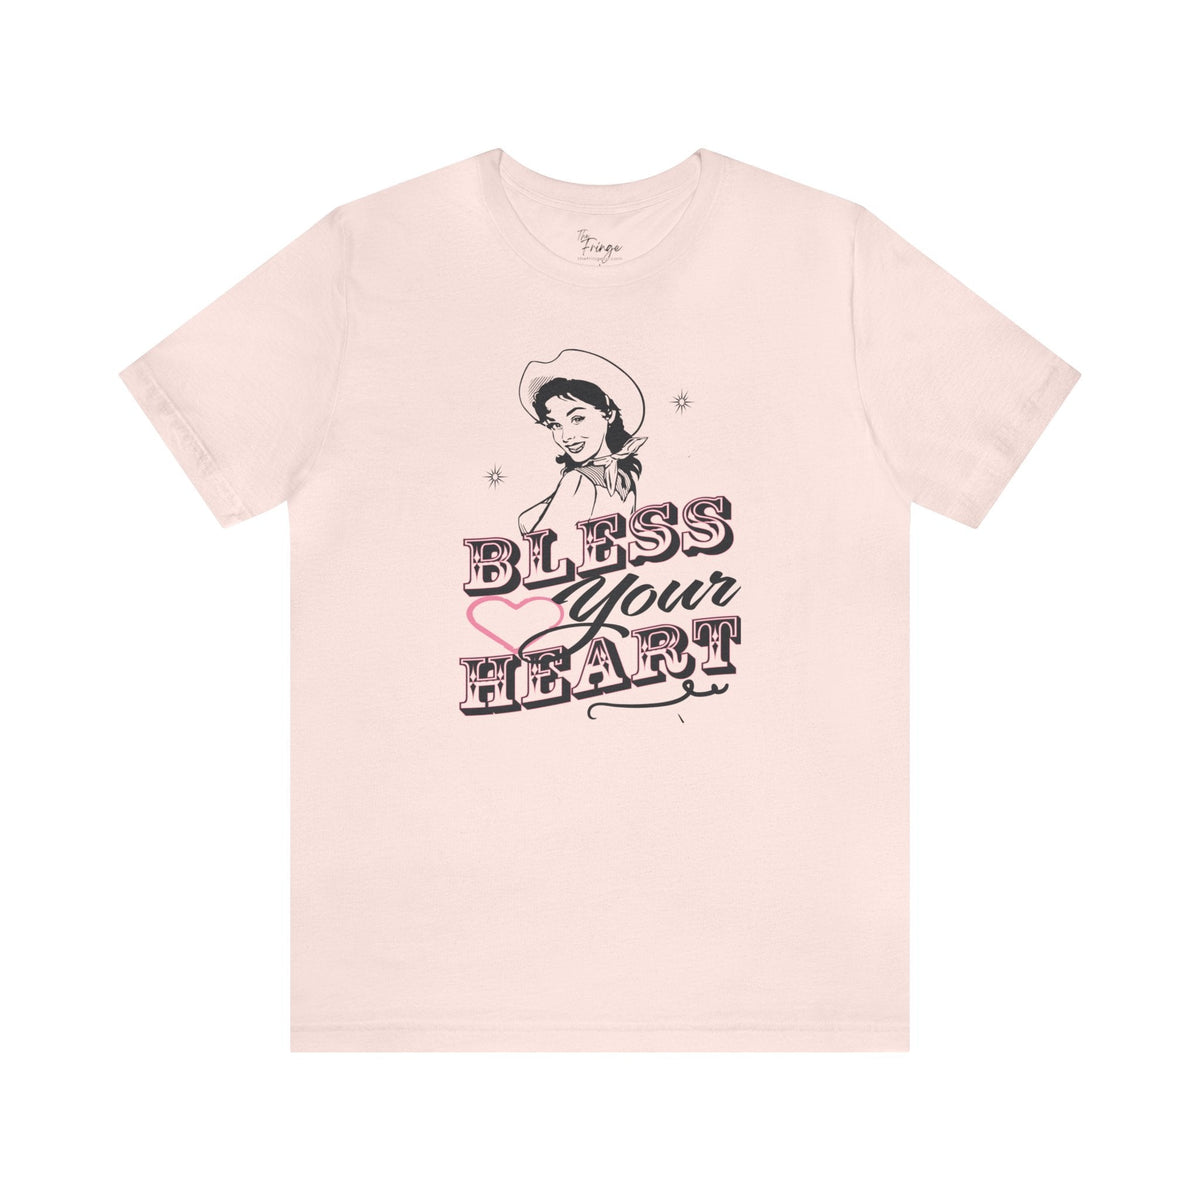 Bless Your Heart Graphic Tee | Women's Country Graphic Tee T-Shirt TheFringeCultureCollective